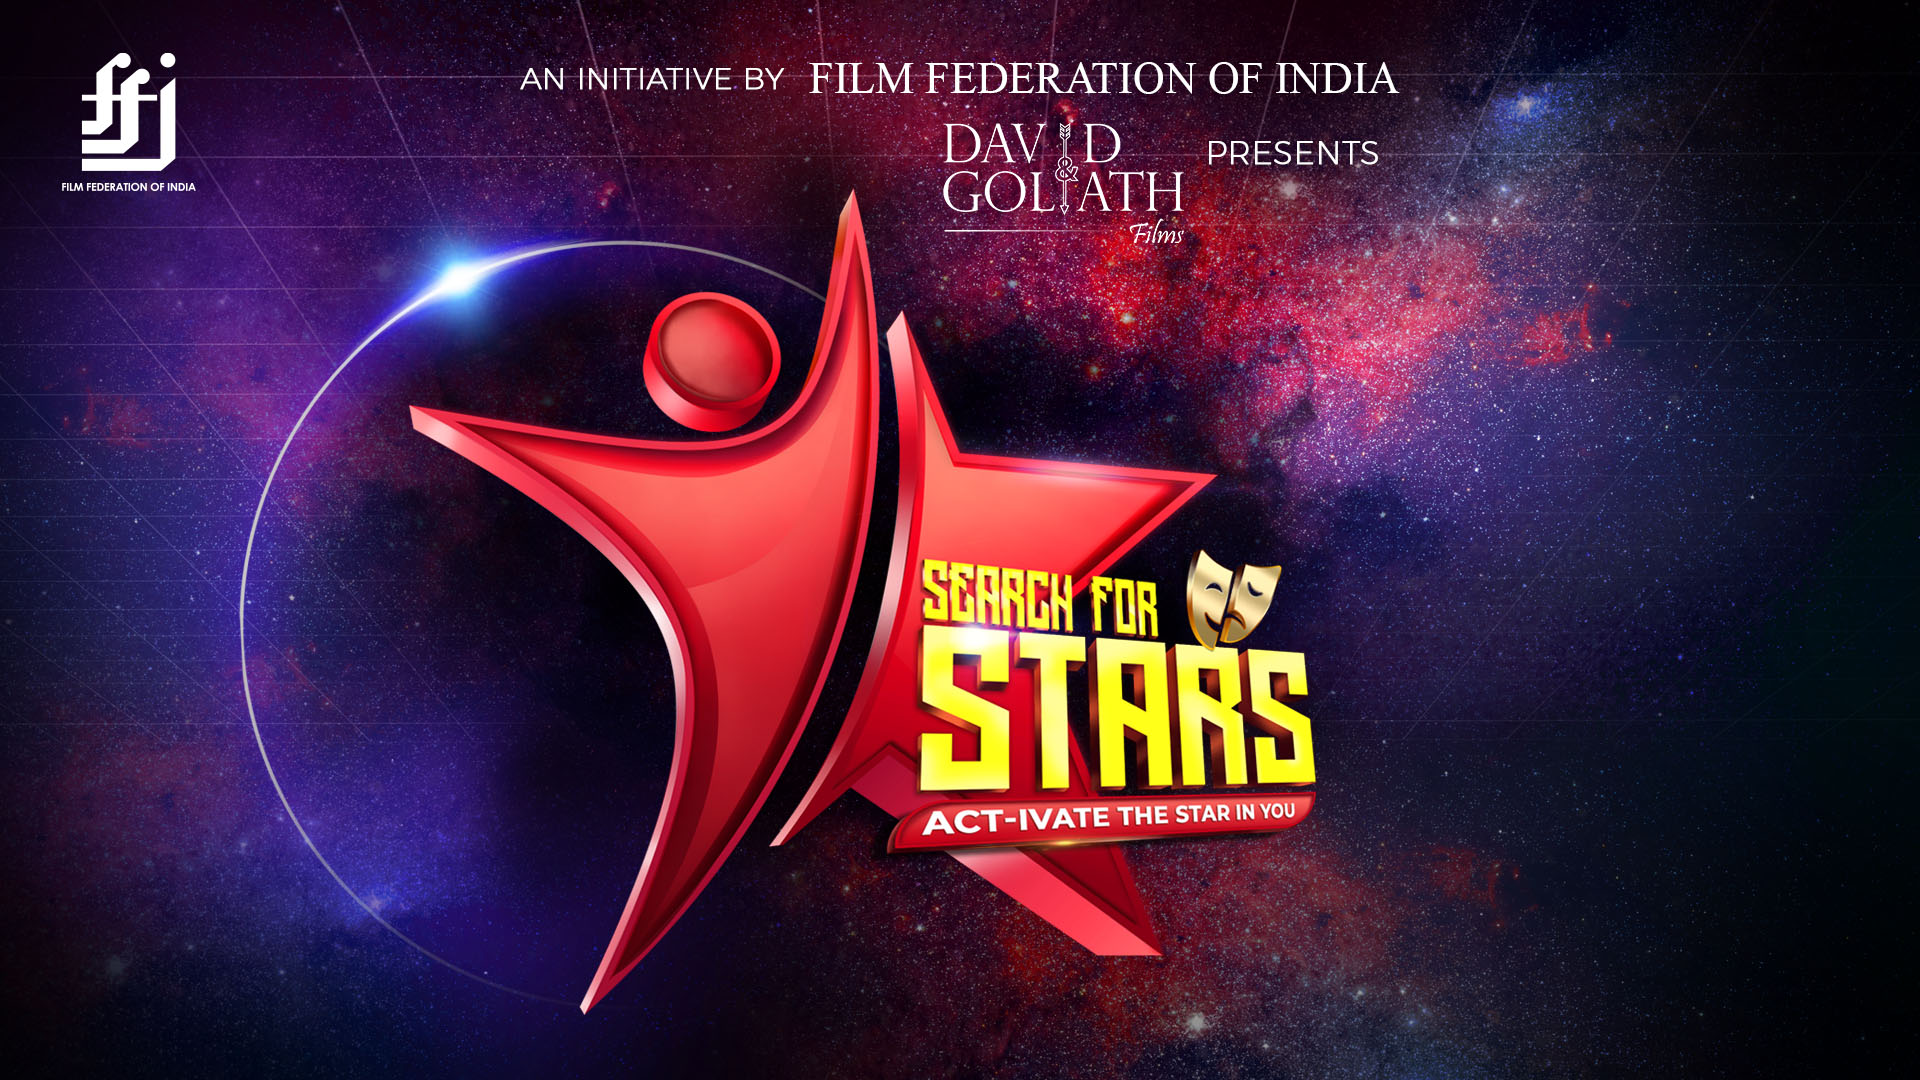 Film Federation of India (FFI) introduces ‘Search for Stars’ - an online platform for budding actors